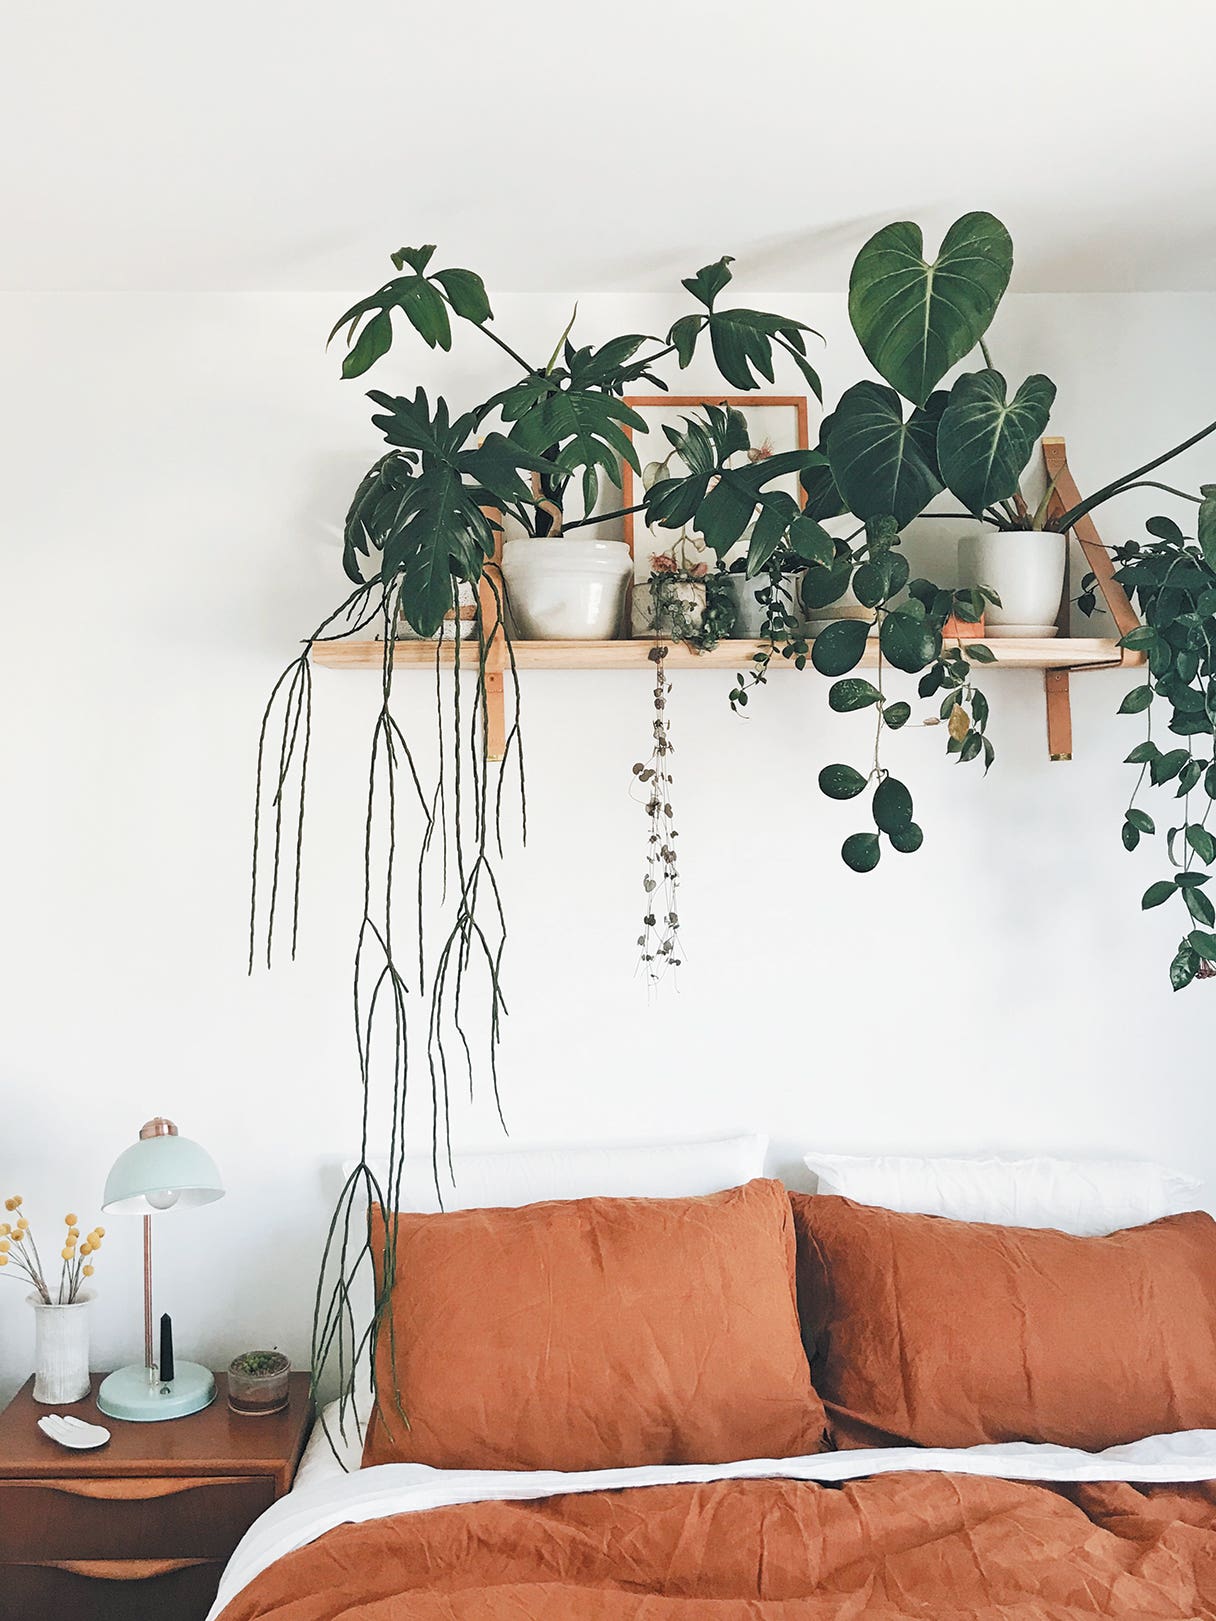 How to Create a Plant Shelf That Doesn’t Get Dirt All Over Your Bedding